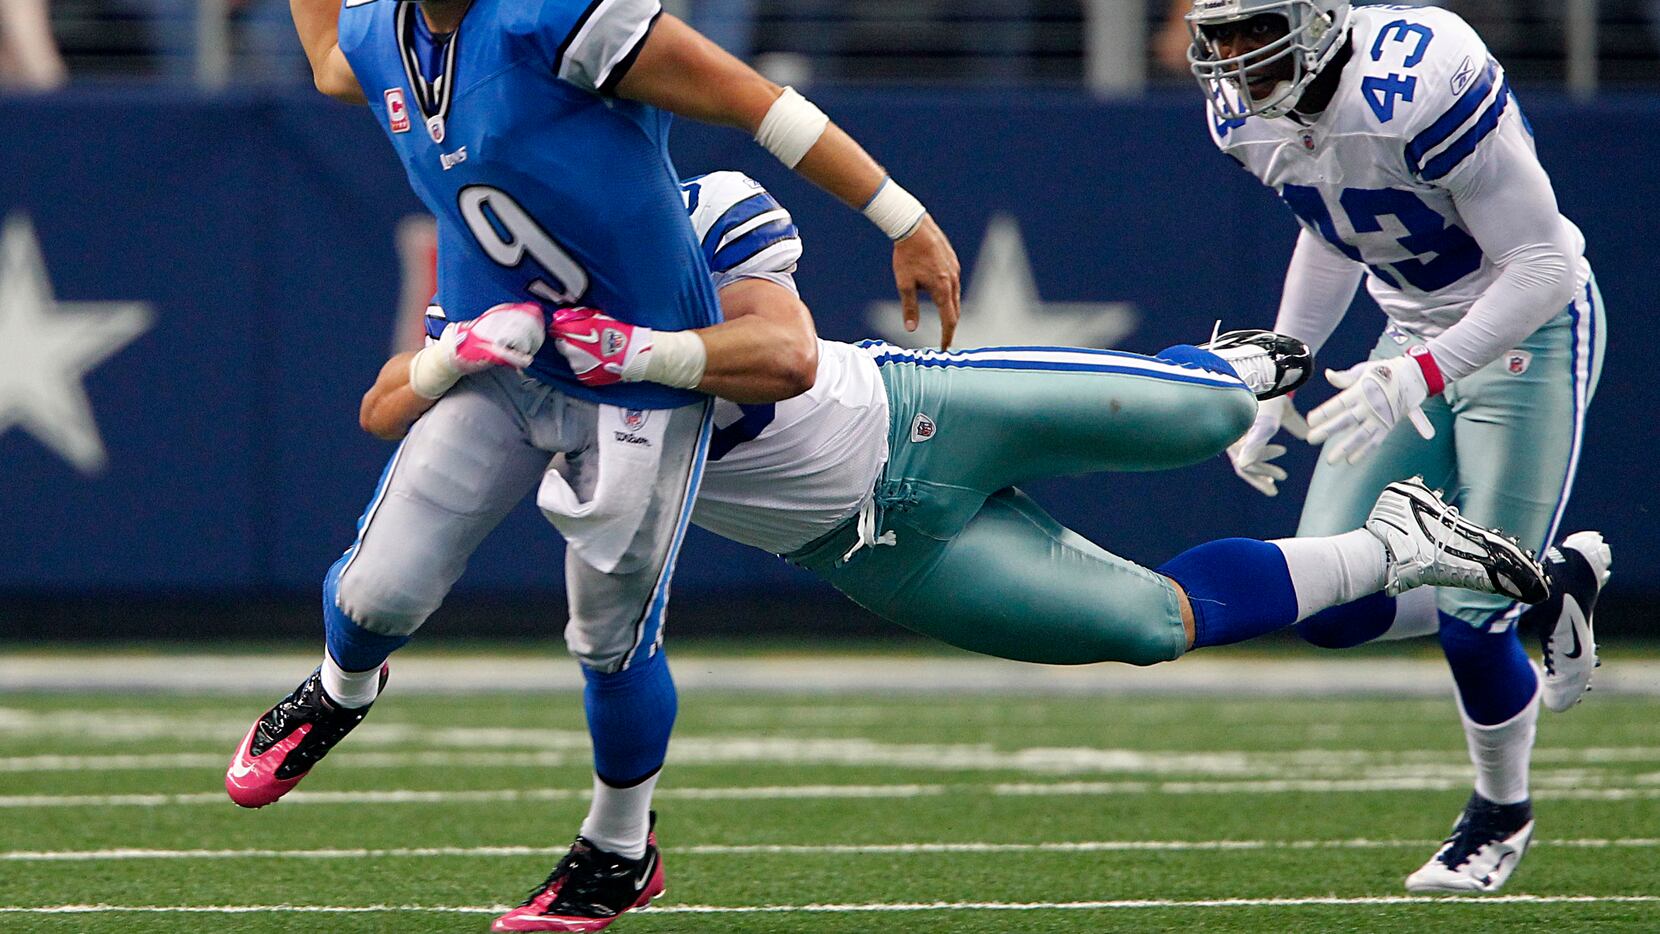 Tony Romo is Lions' MVP; Cowboys lose in historic collapse, 34-30